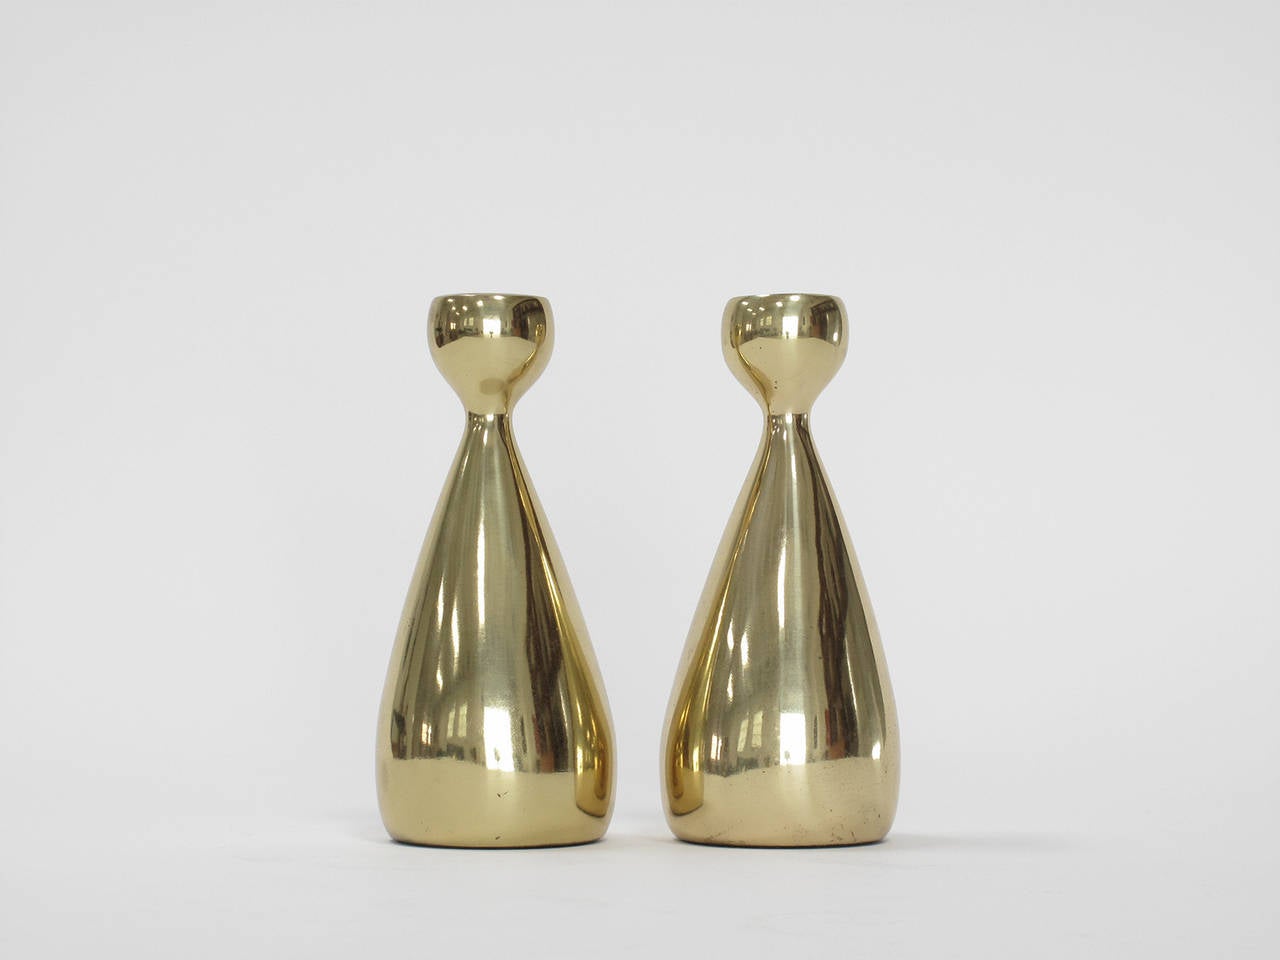 Pair of brass-plated cast metal candleholders designed by Ben Seibel and produced by Jenfred Ware, original model number A609, New York, 1950s. Measures: 6.25" high x 2.75" diameter.